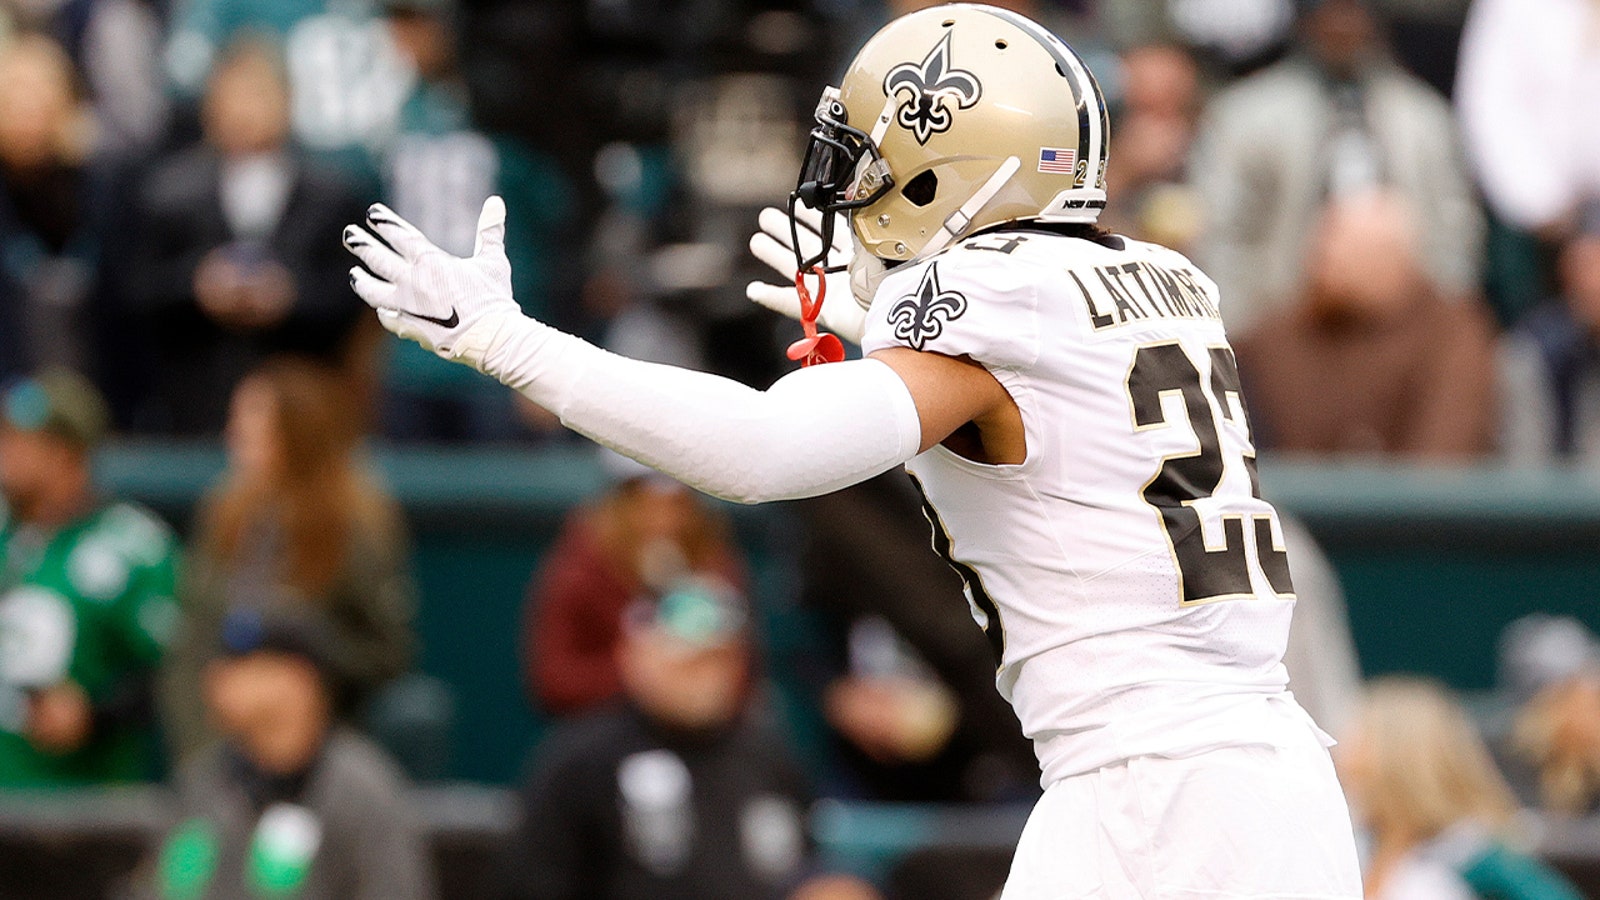 Marshon Lattimore seals win over Eagles with clutch INT